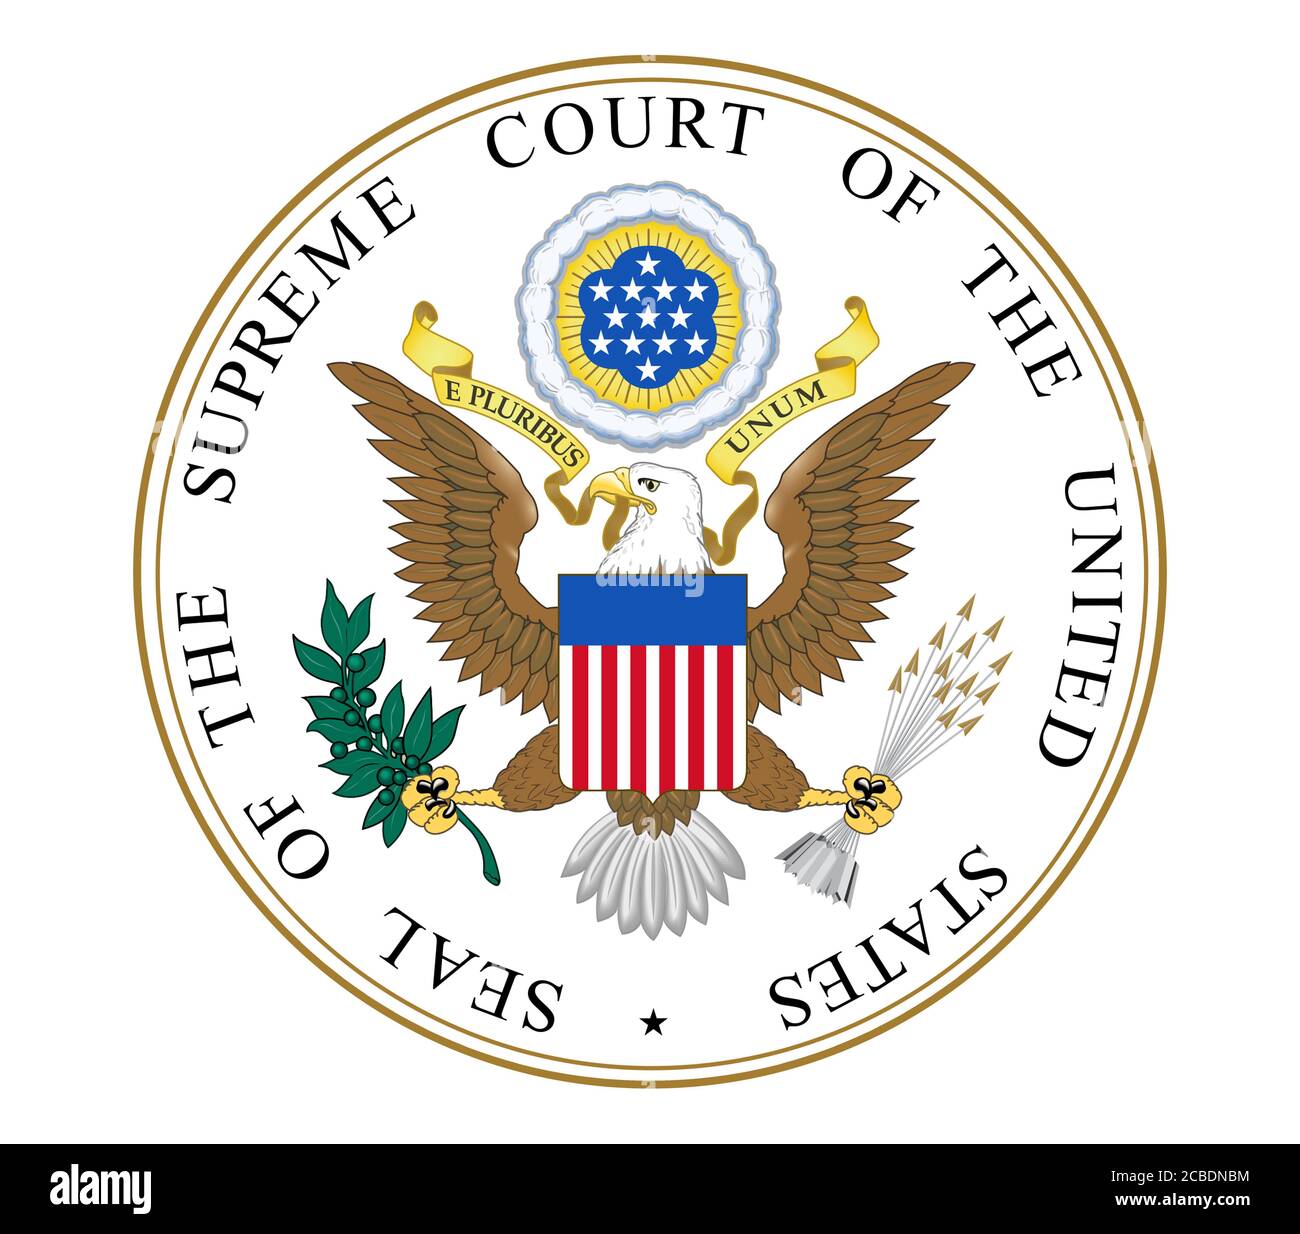 Seal of the United States of America Supreme Court Stock Photo